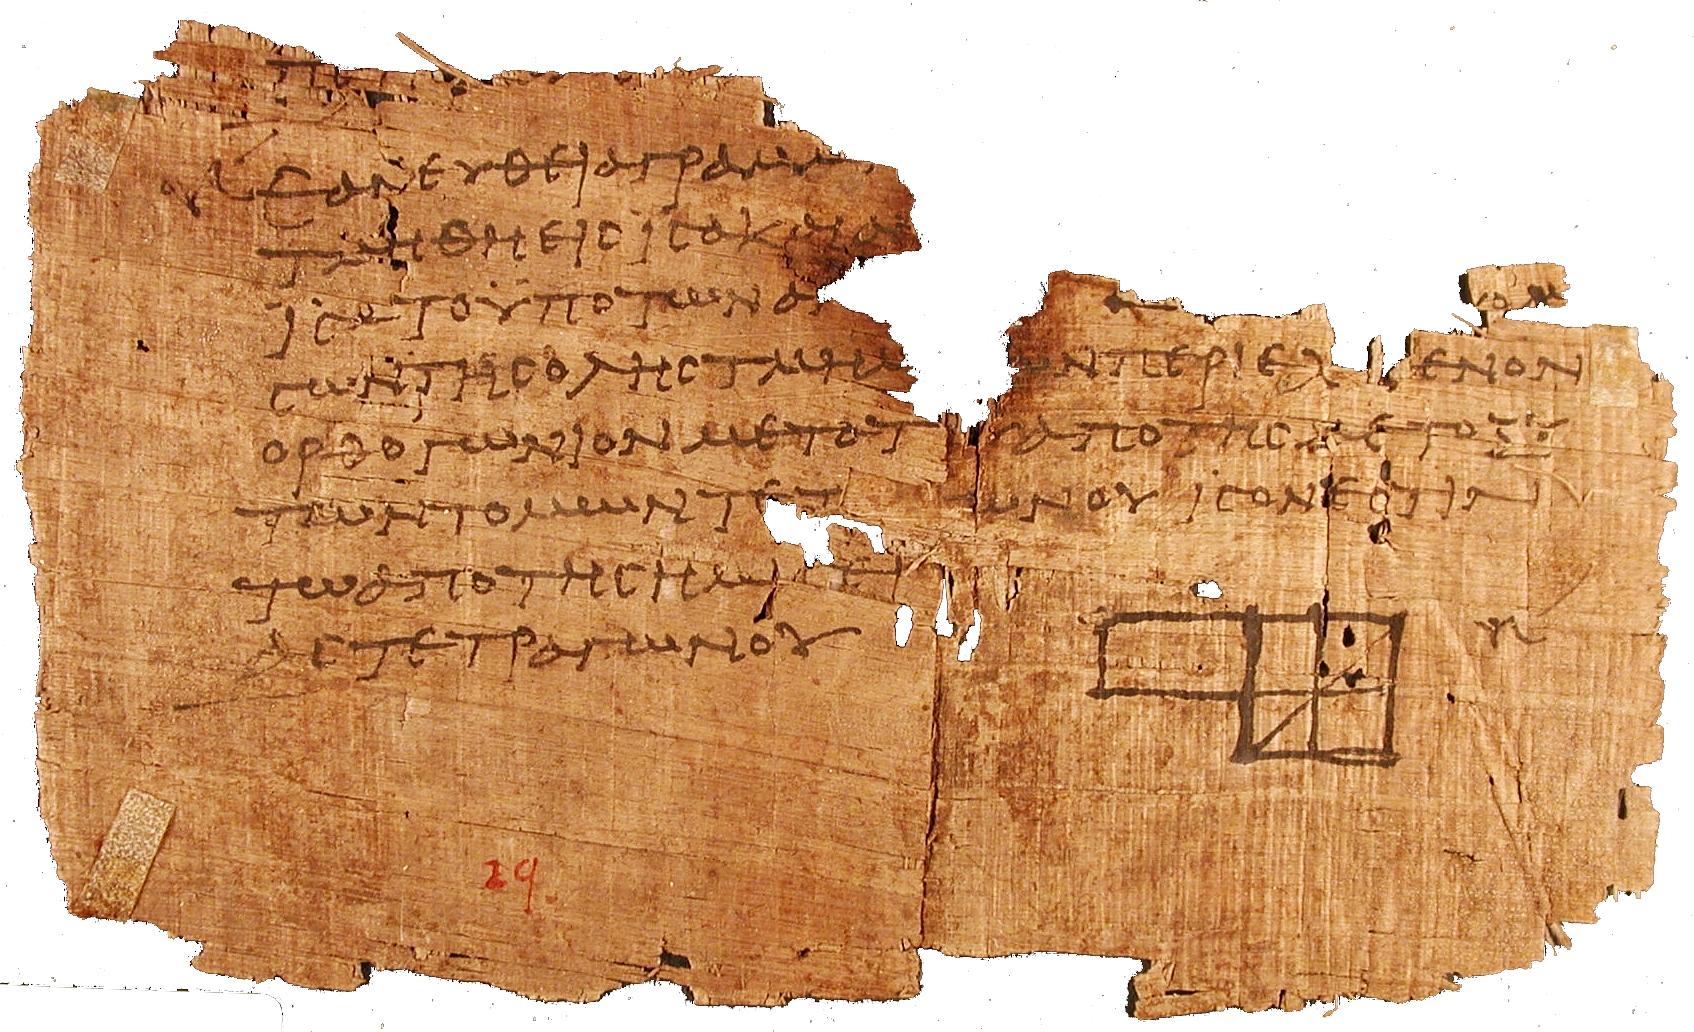 The oldest diagram from Euclid